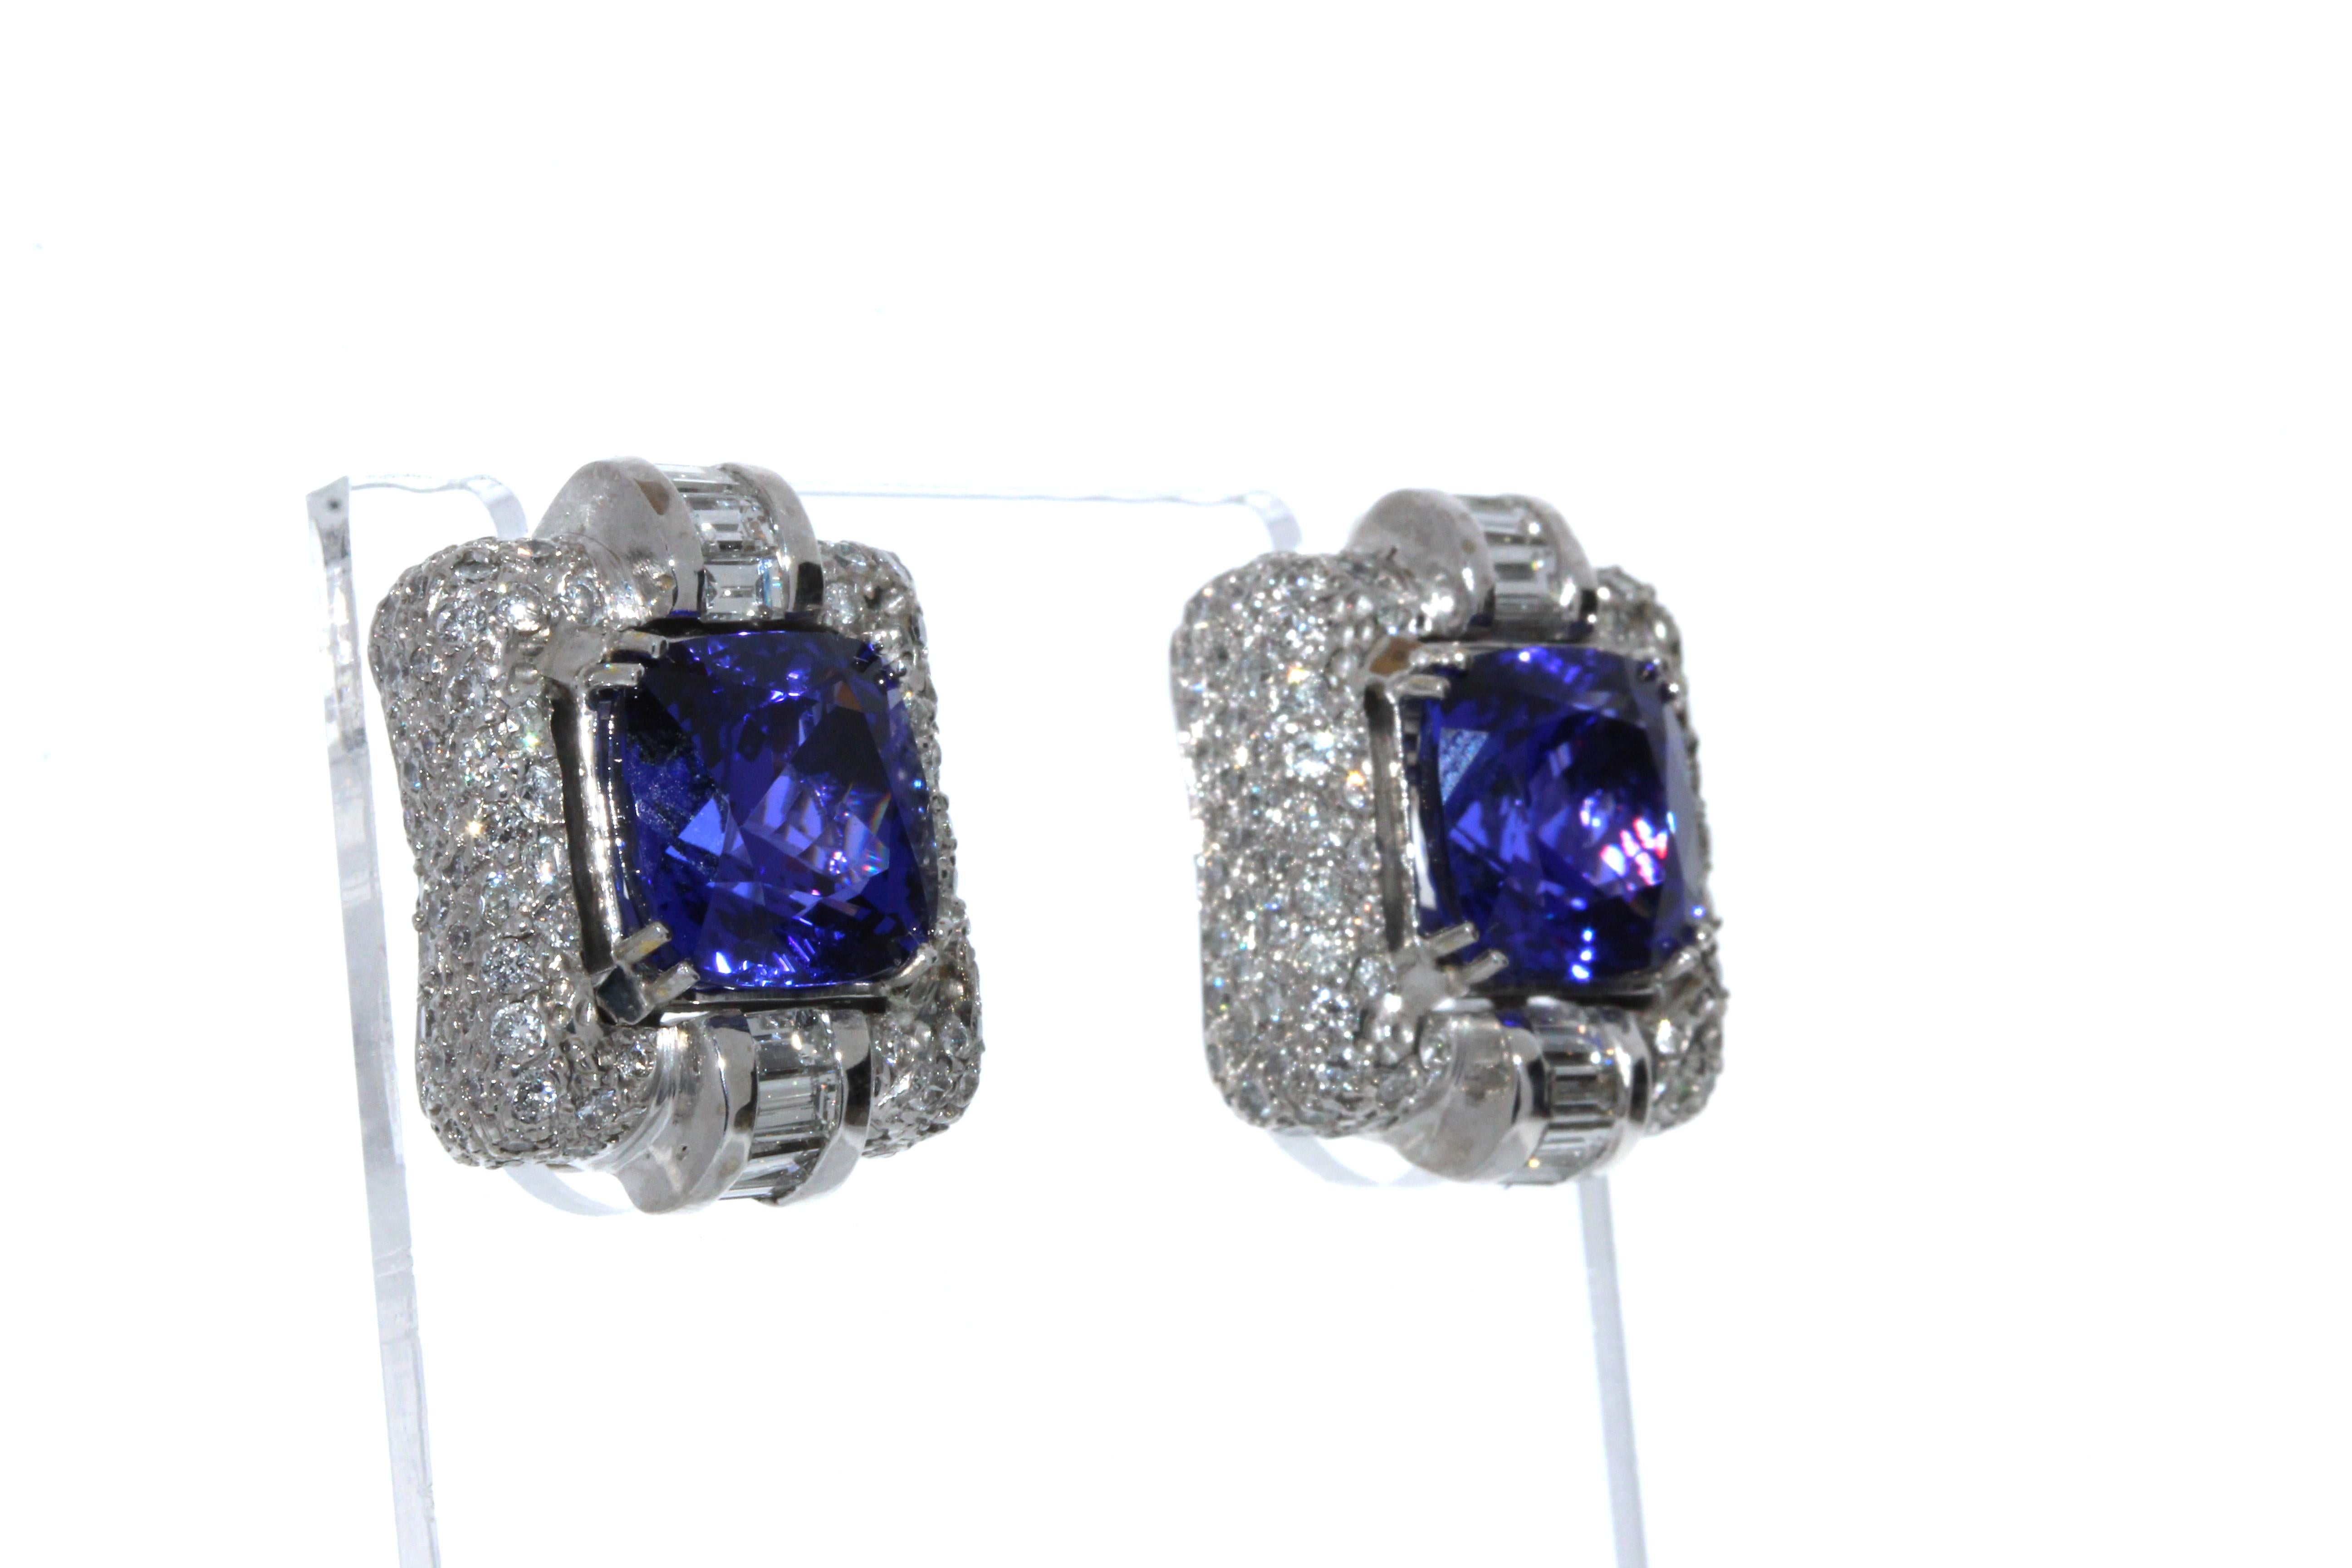 These earrings feature cushion cut Tanzanite gemstones that total up to 12.49CTW and the round brilliant diamonds total up to 2.50CTW.